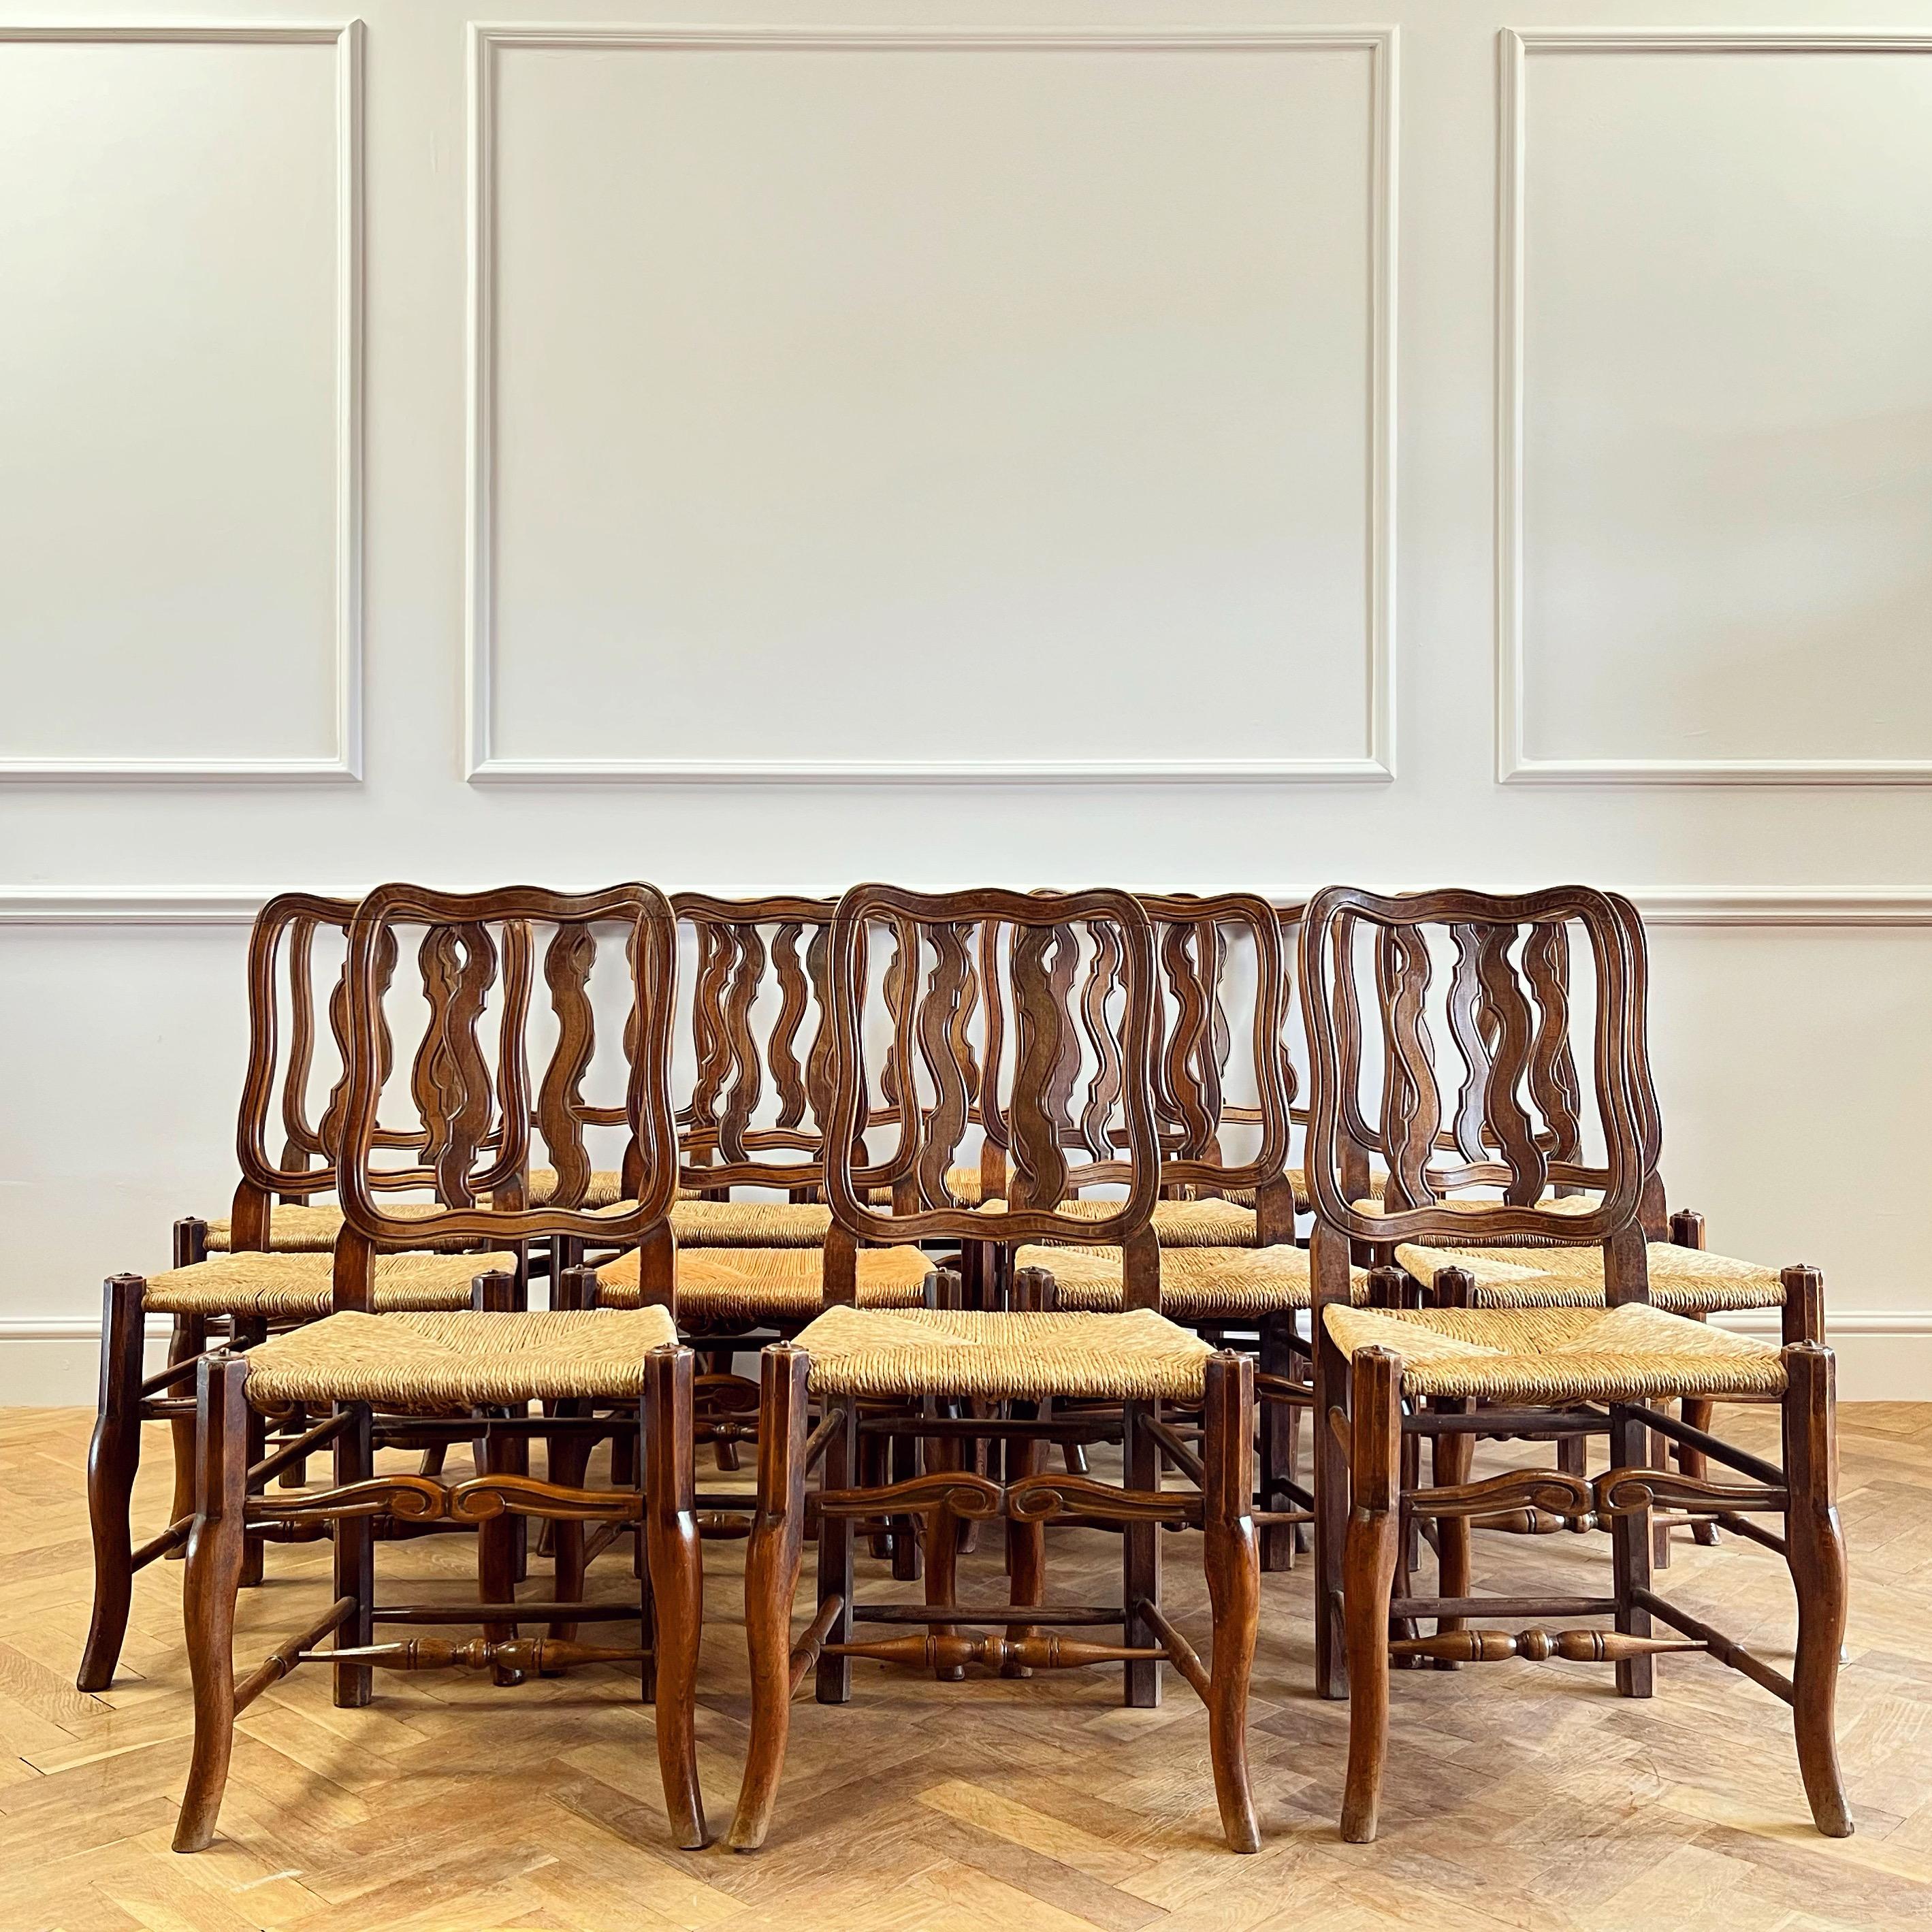 Set of Fourteen Early Twentieth Century French Vernacular Dining Chairs In Good Condition For Sale In London, GB